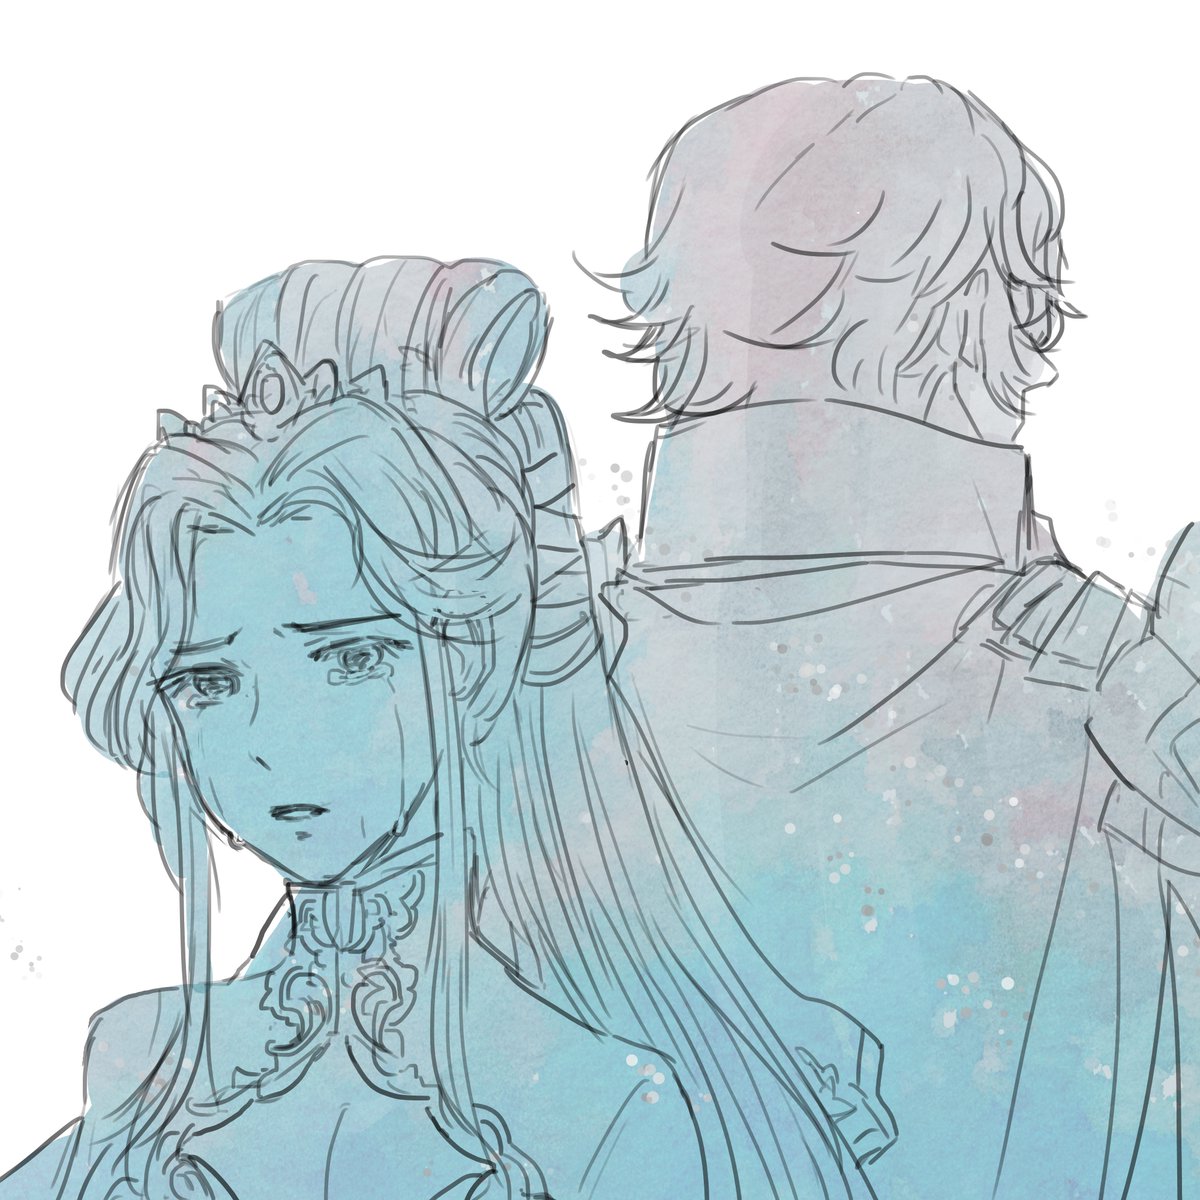 8. Camus/Nyna"Were my heart my master, I would do exactly as you say. Farewell, my princess. I shall never forget our days together at the palace, few though they were. I pray you meet someone who can bring joy back into your life.”